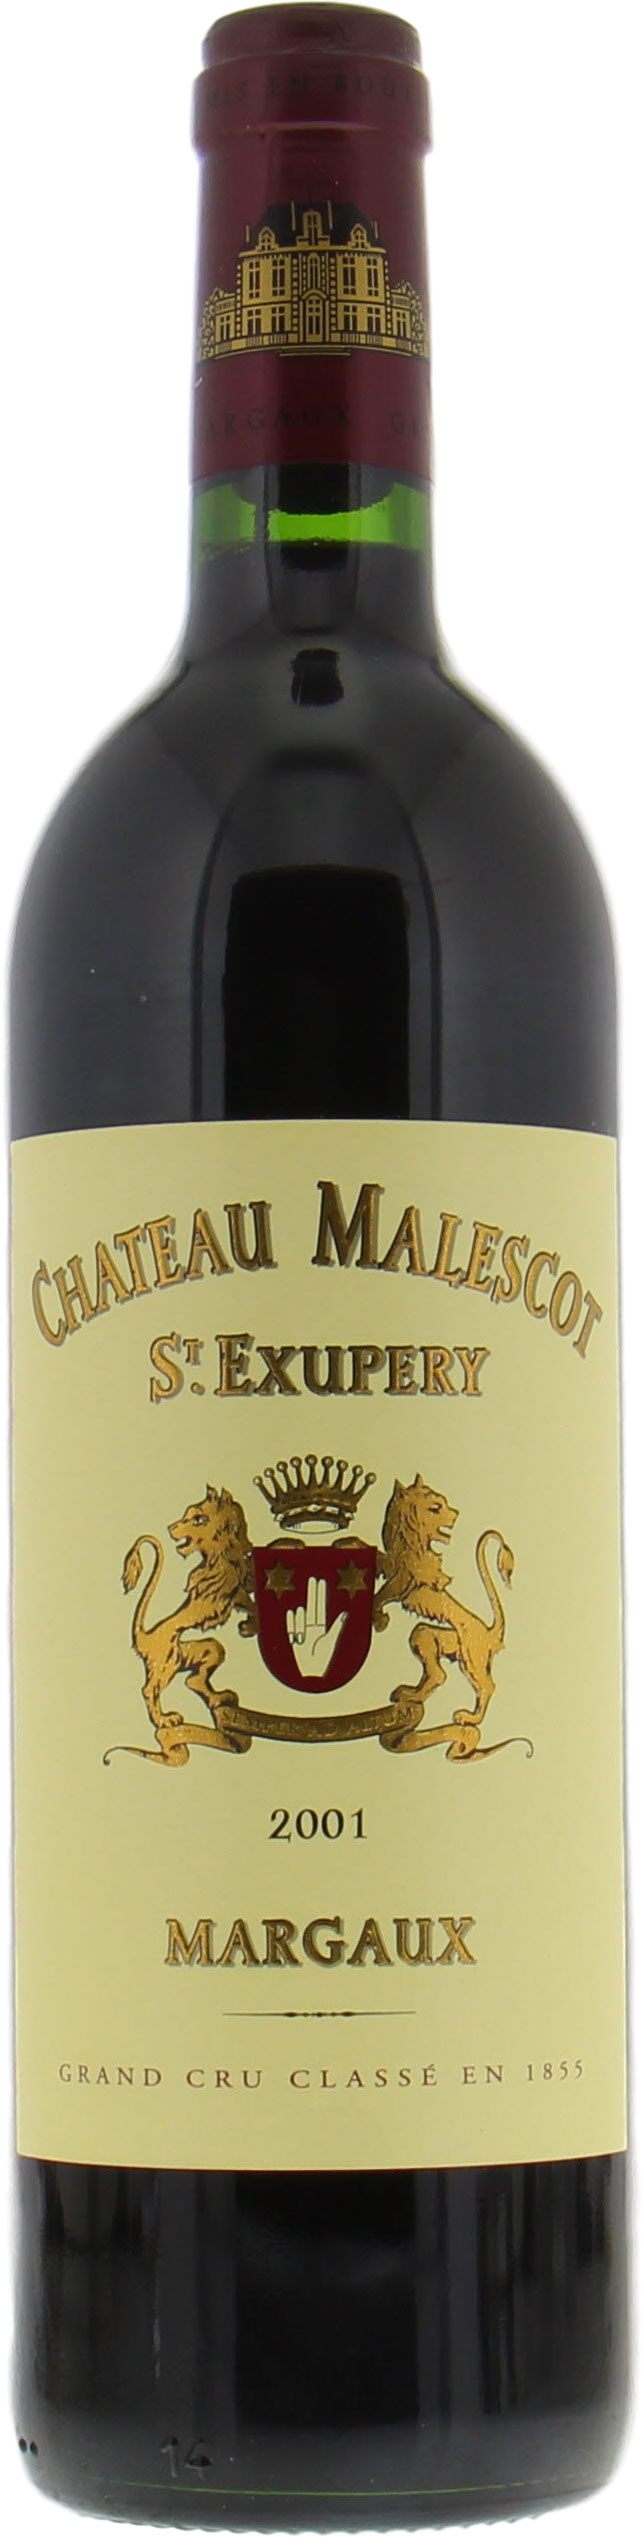 Chateau Malescot-St-Exupery - Chateau Malescot-St-Exupery 2001